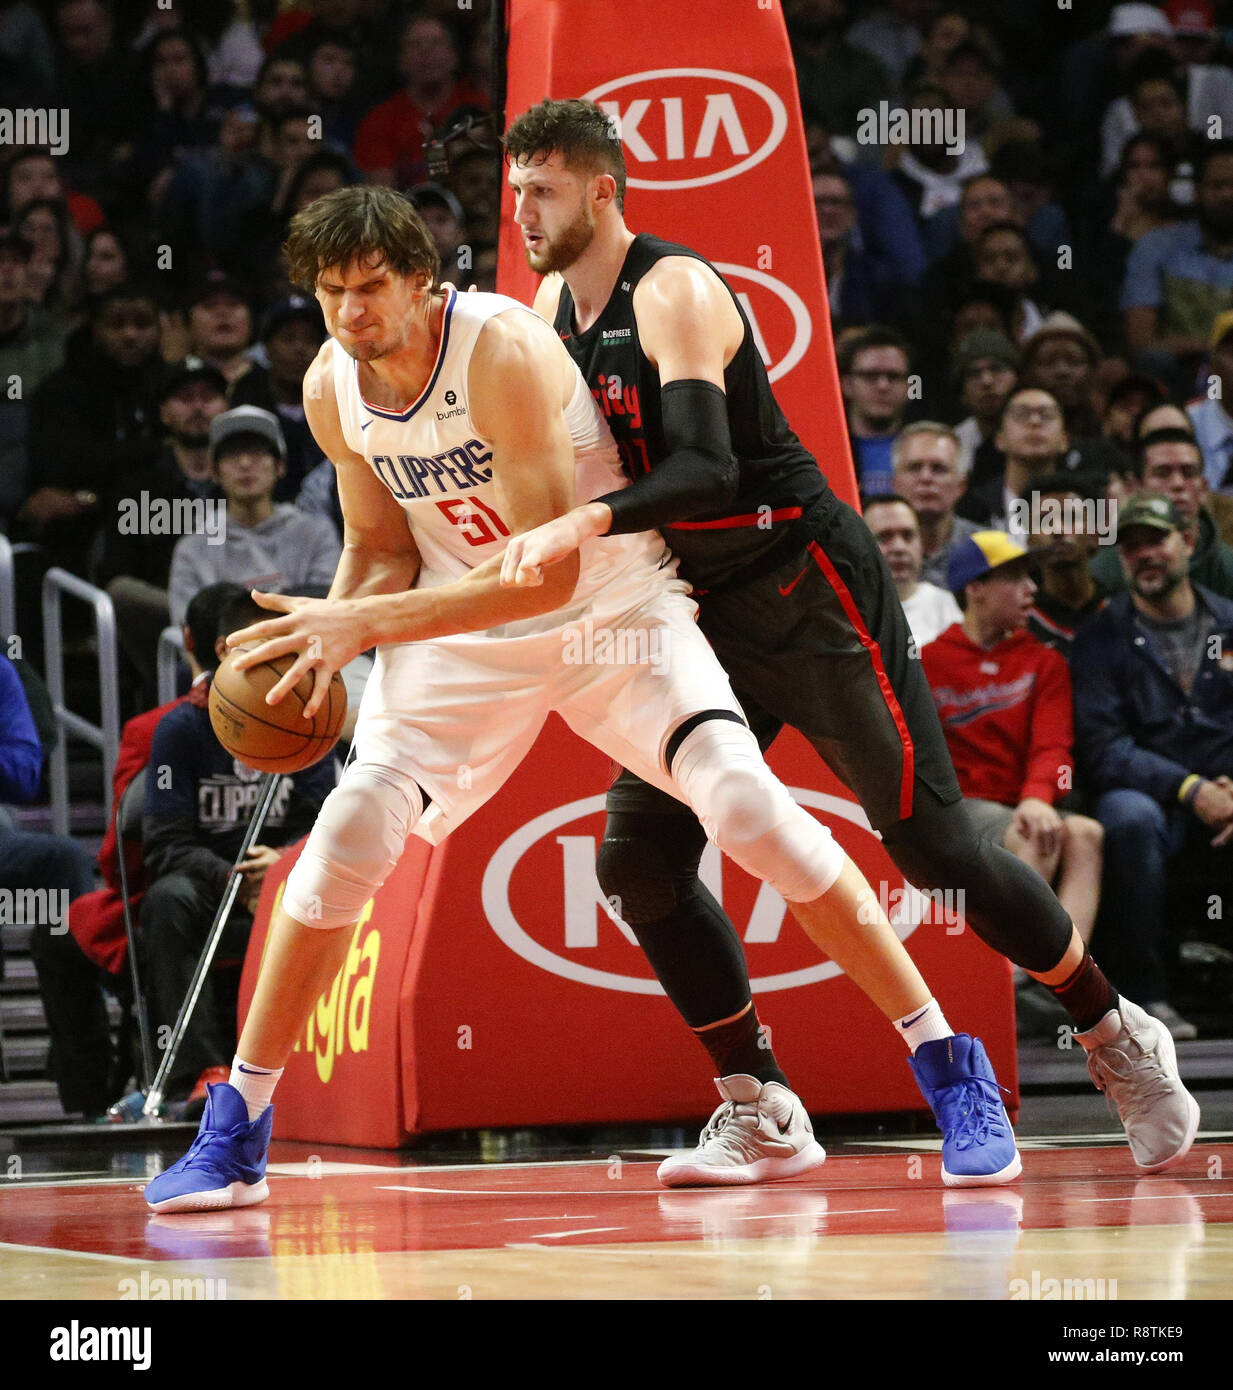 Los Angeles, California, USA. 17th Dec, 2018. Los Angeles Clippers' Boban  Marjanovic (51) poses against Portland Trail Blazers' Jusuf Nurkic (27) in  an NBA basketball game between Los Angeles Clippers and Portland